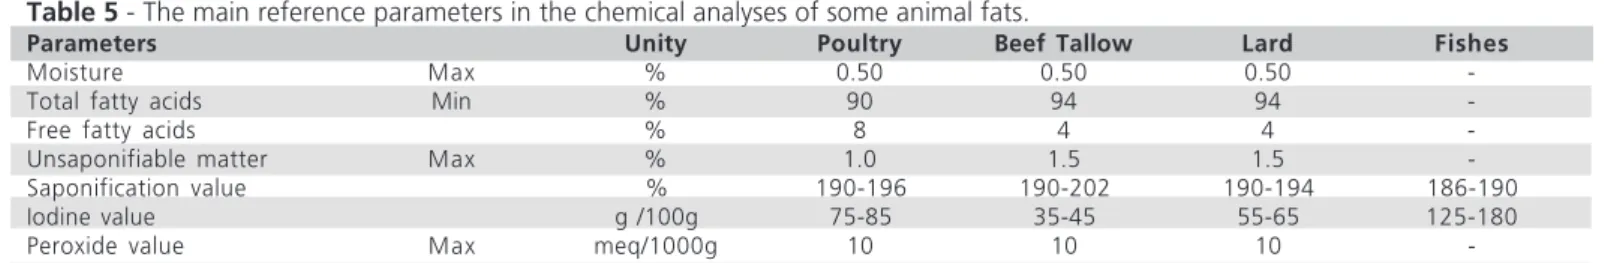 Table 5  - The main reference parameters in the chemical analyses of some animal fats.